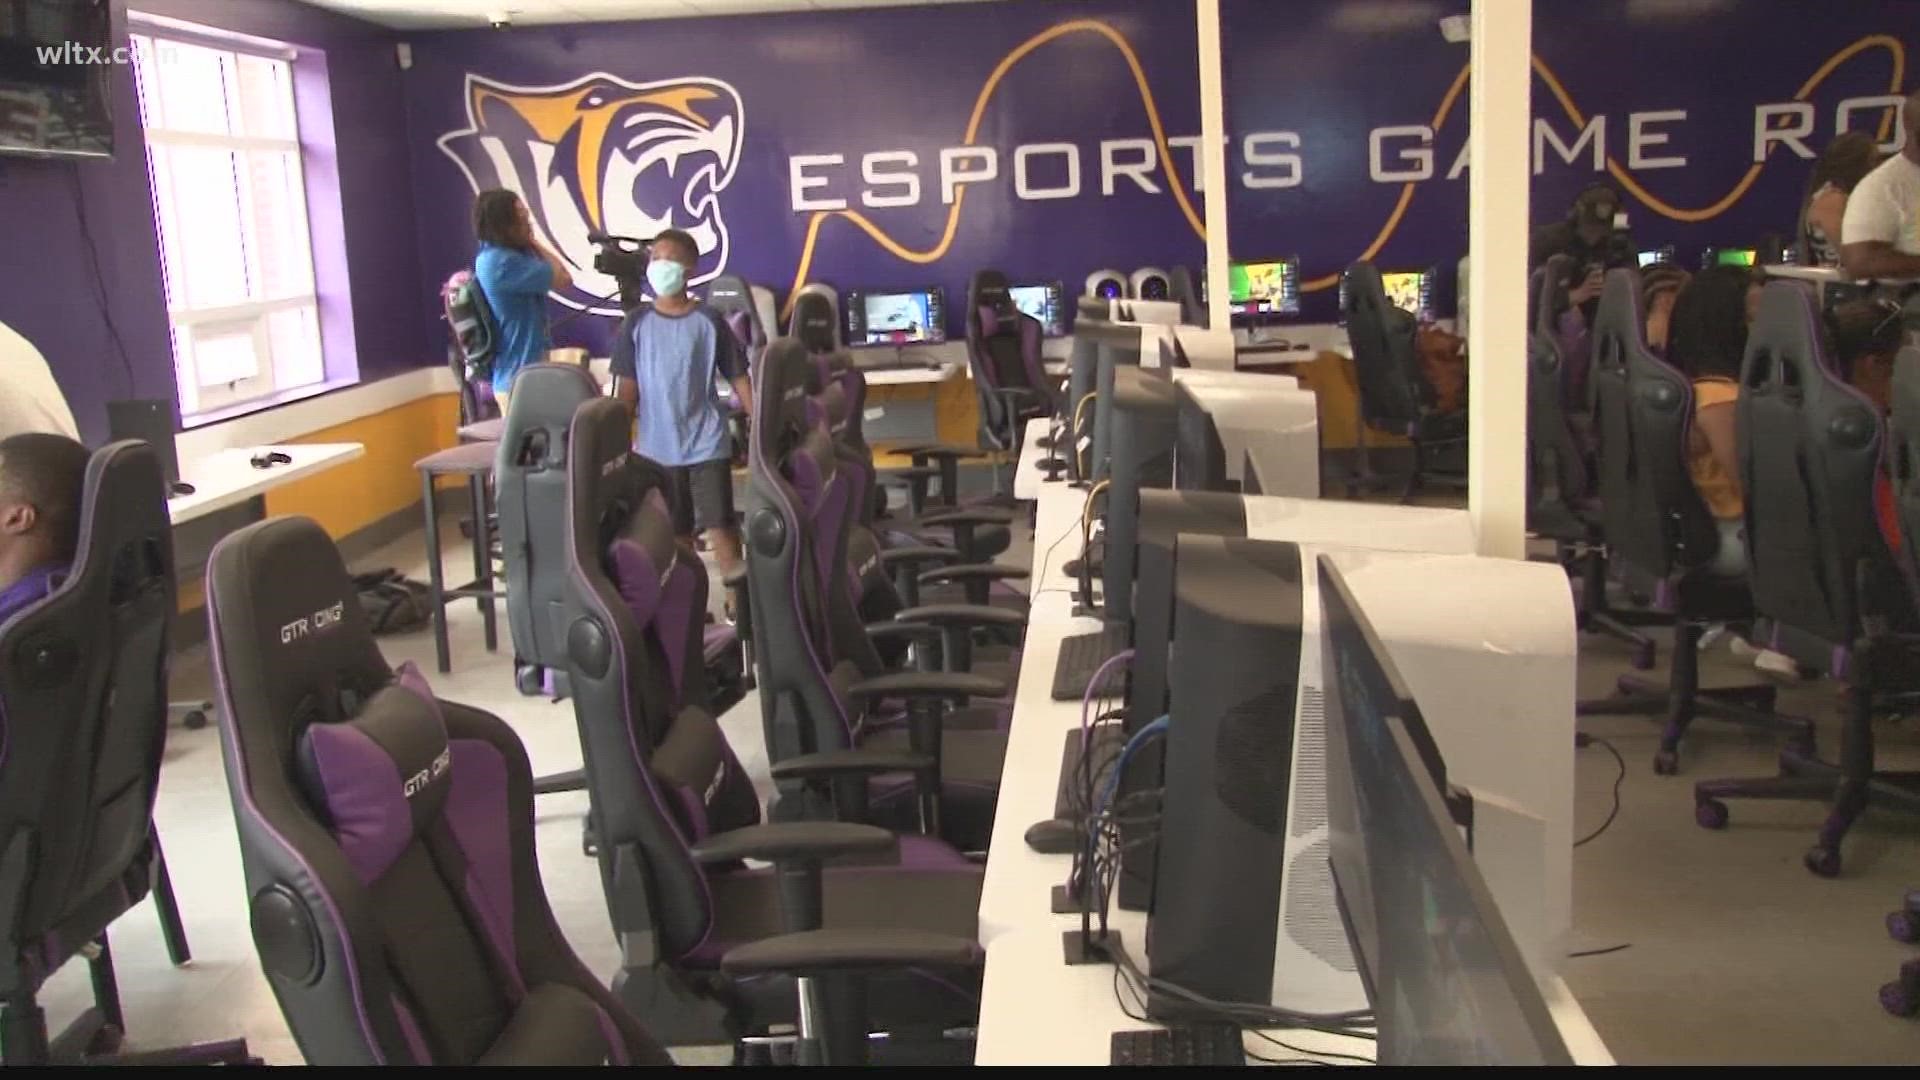 The new room has over 20 gaming computers with over 40 games available.